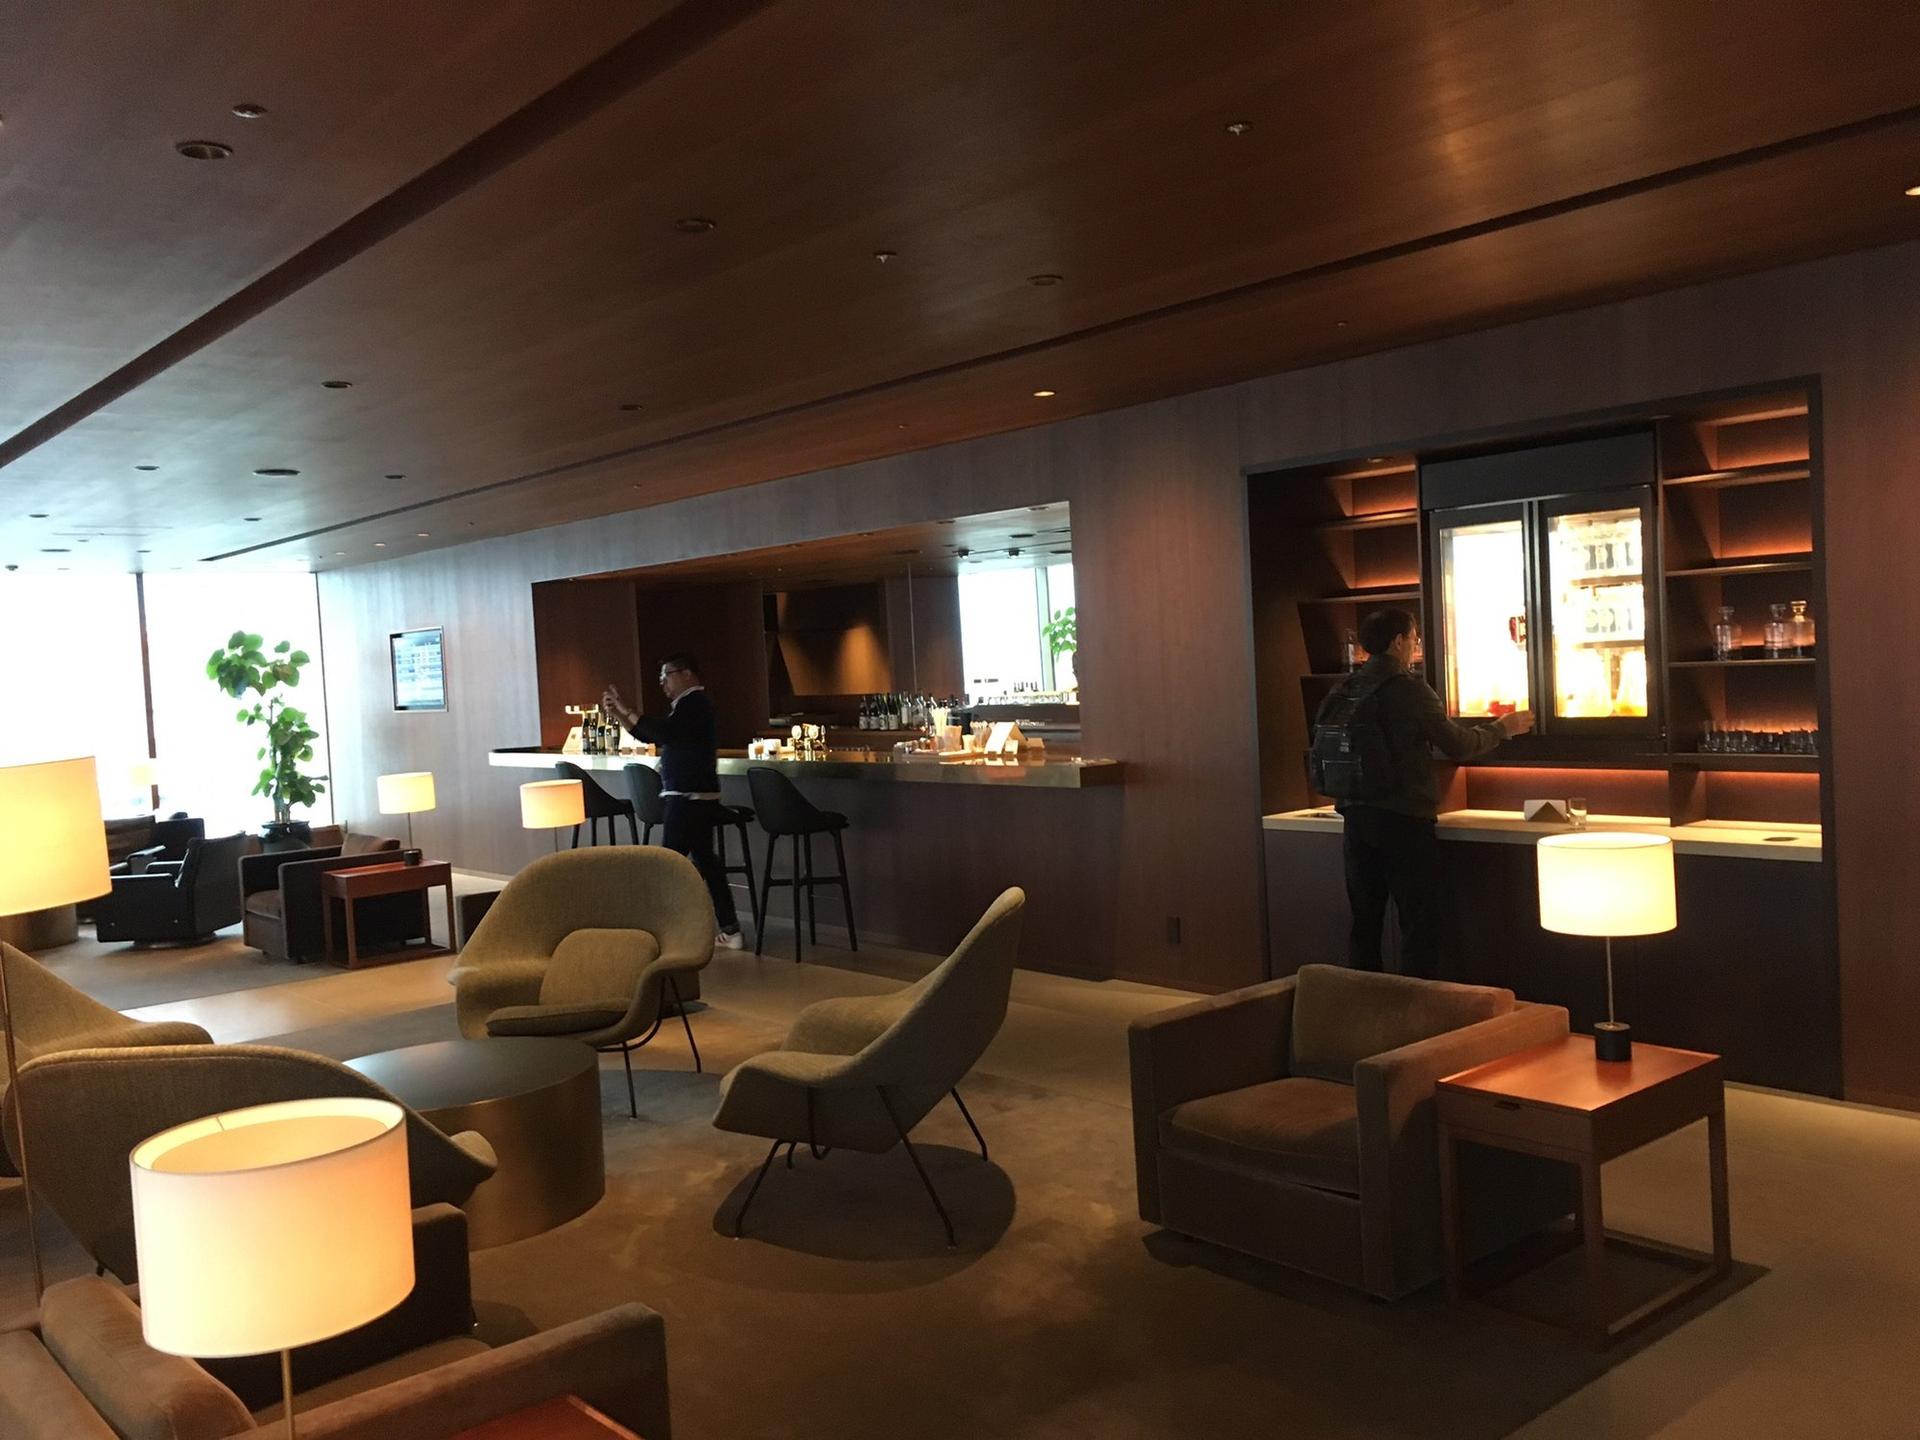 Cathay Pacific Lounge image 49 of 49